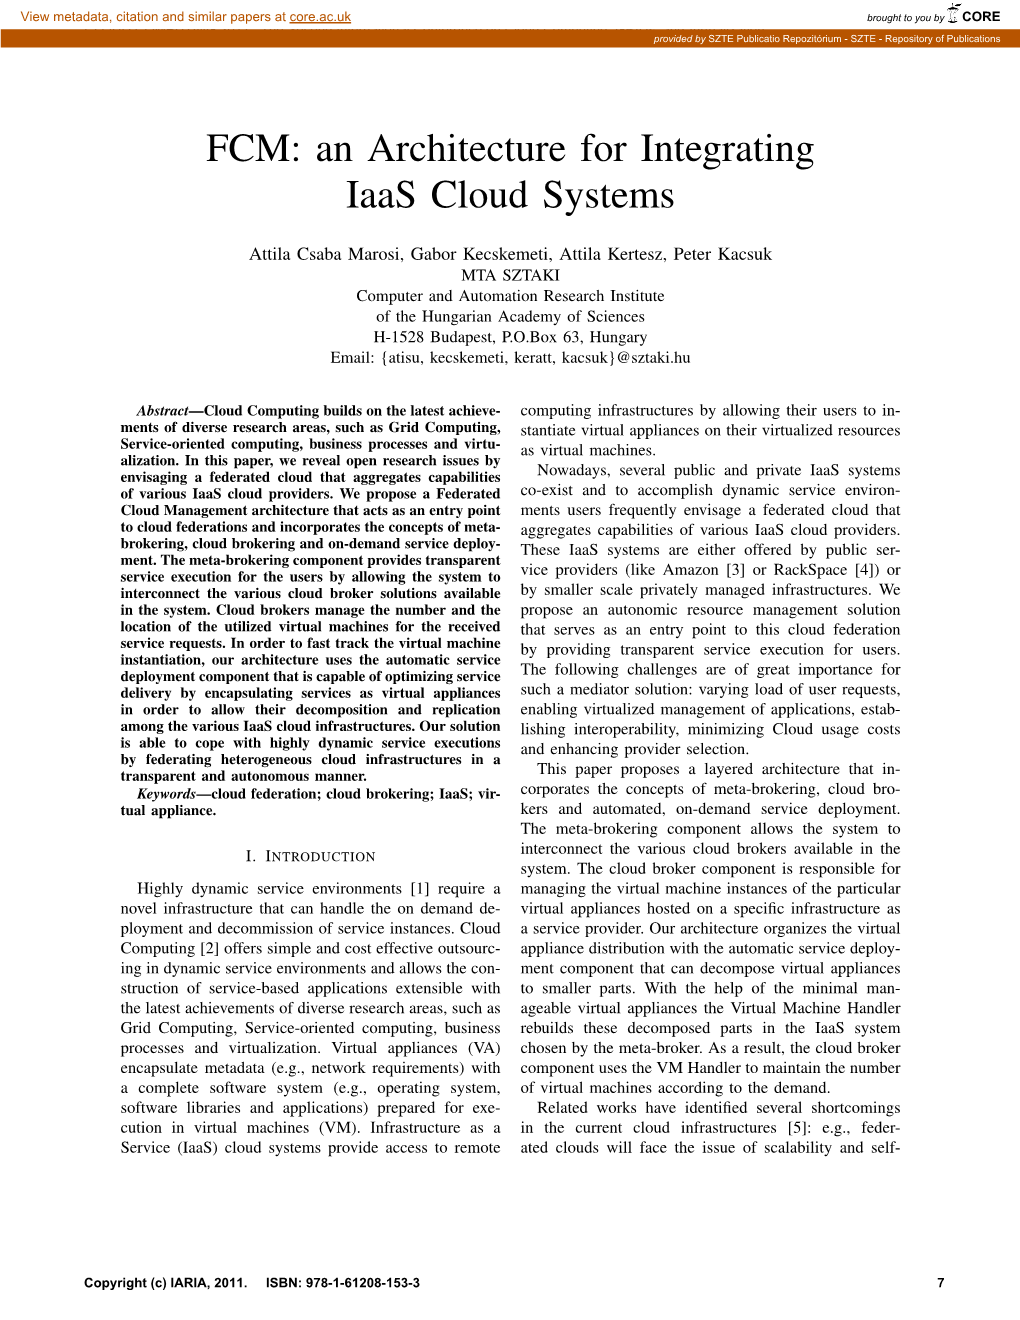 FCM: an Architecture for Integrating Iaas Cloud Systems